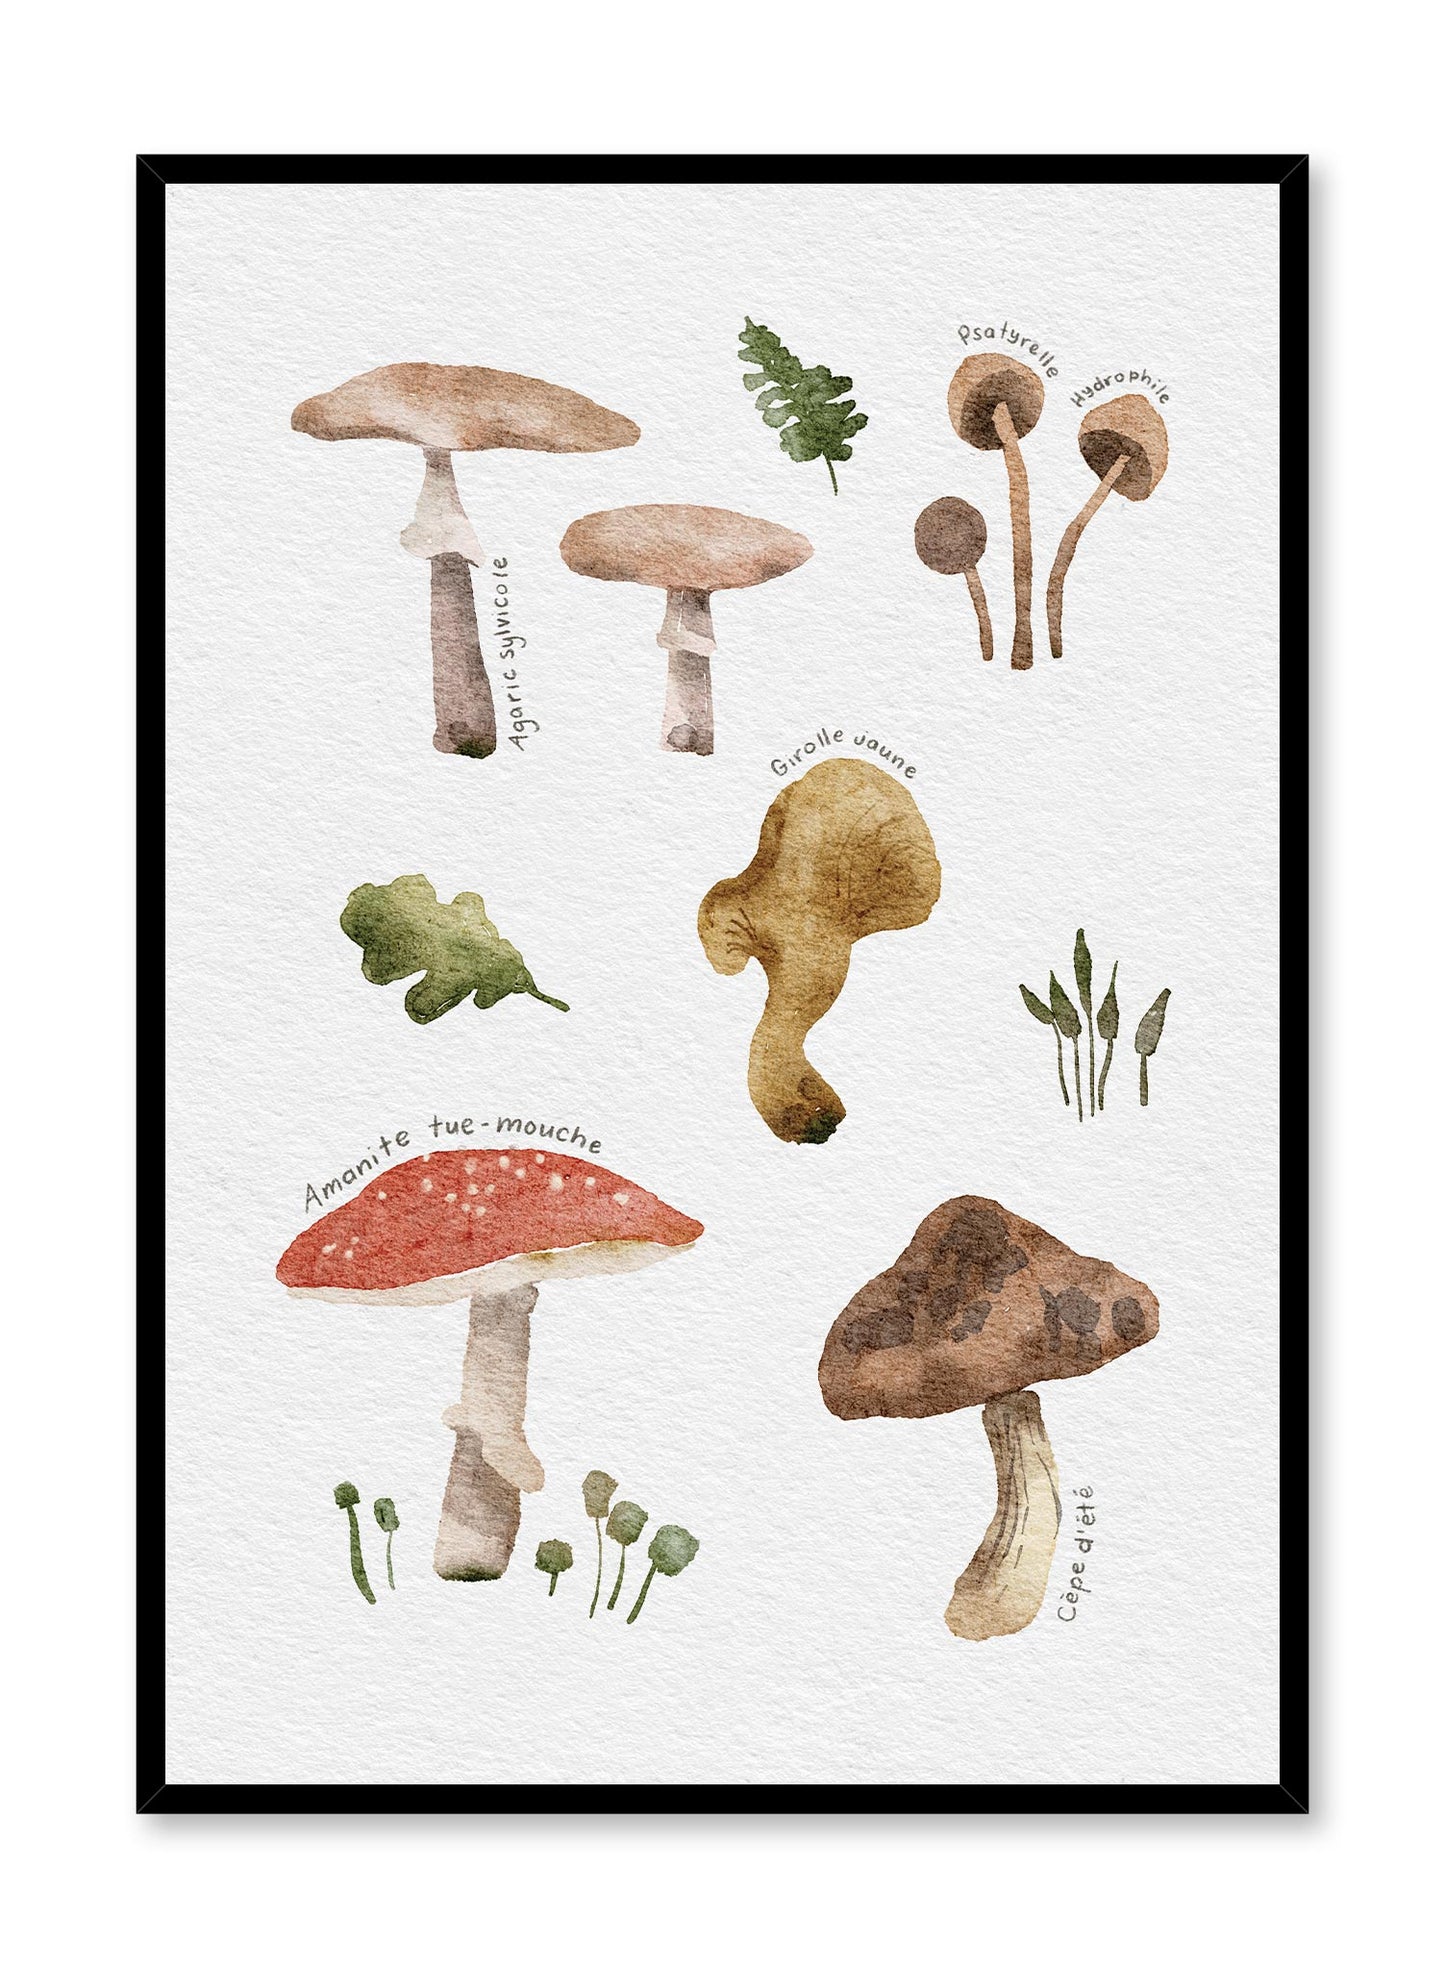 Foraging Mushrooms in French, Poster